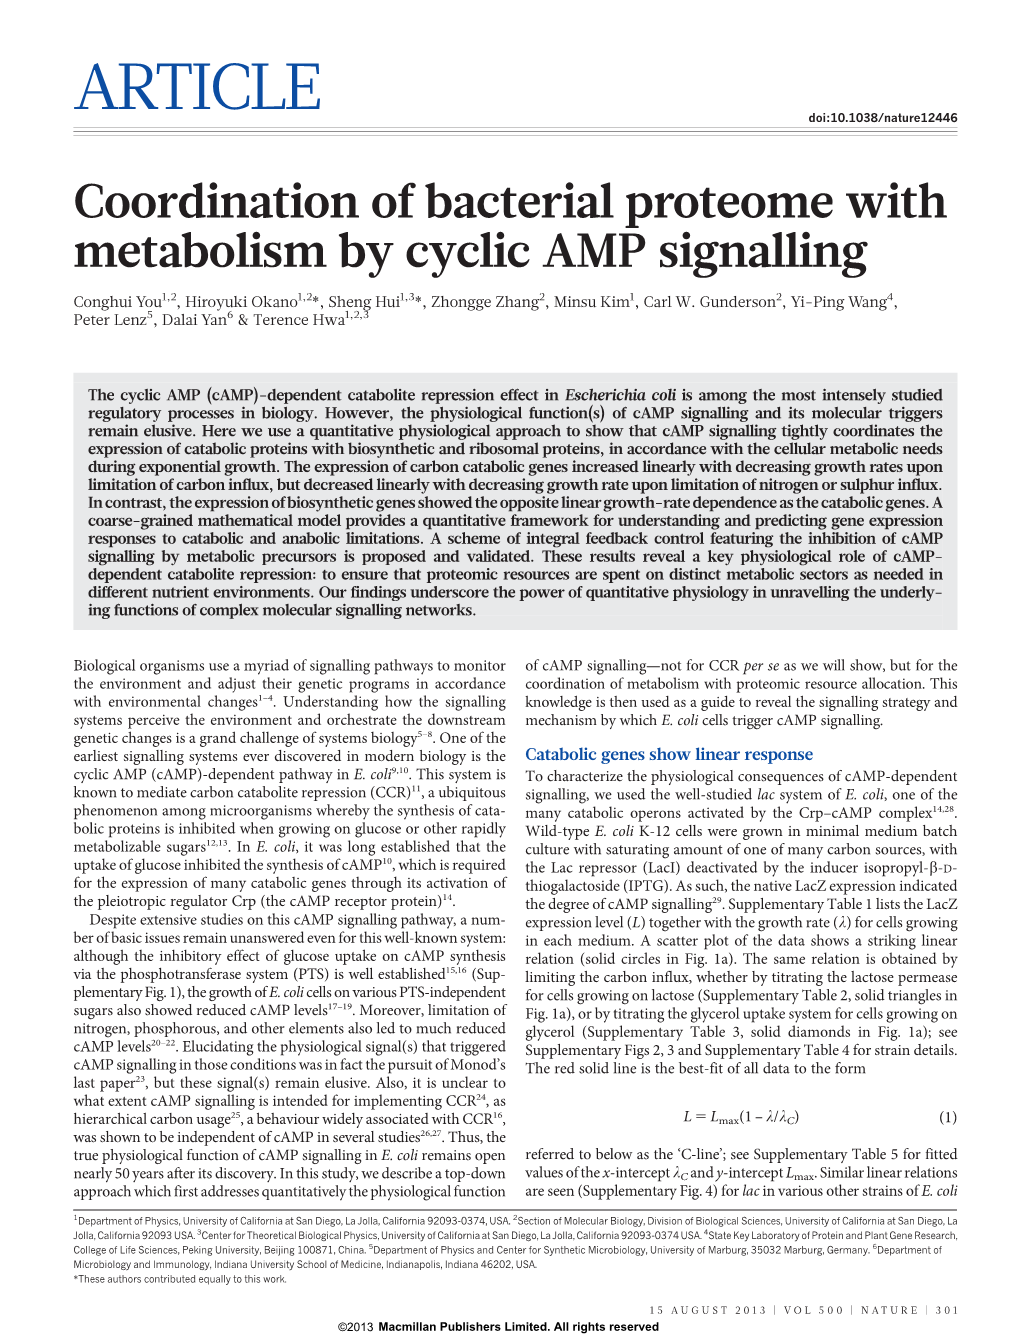 Coordination of Bacterial Proteome with Metabolism by Cyclic AMP Signalling